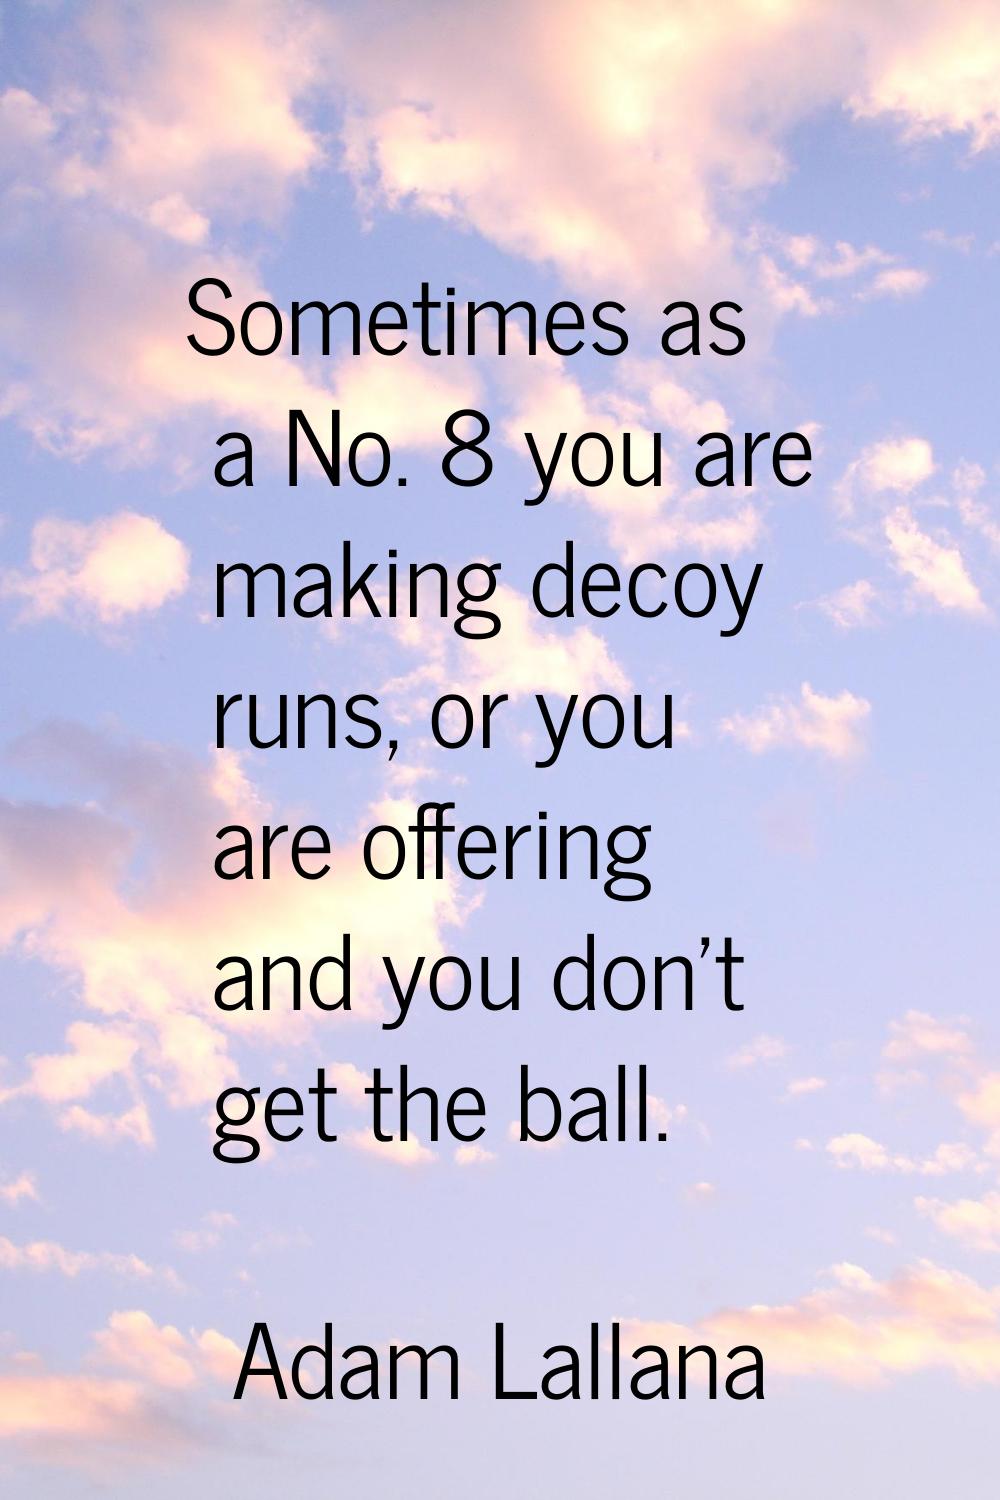 Sometimes as a No. 8 you are making decoy runs, or you are offering and you don't get the ball.